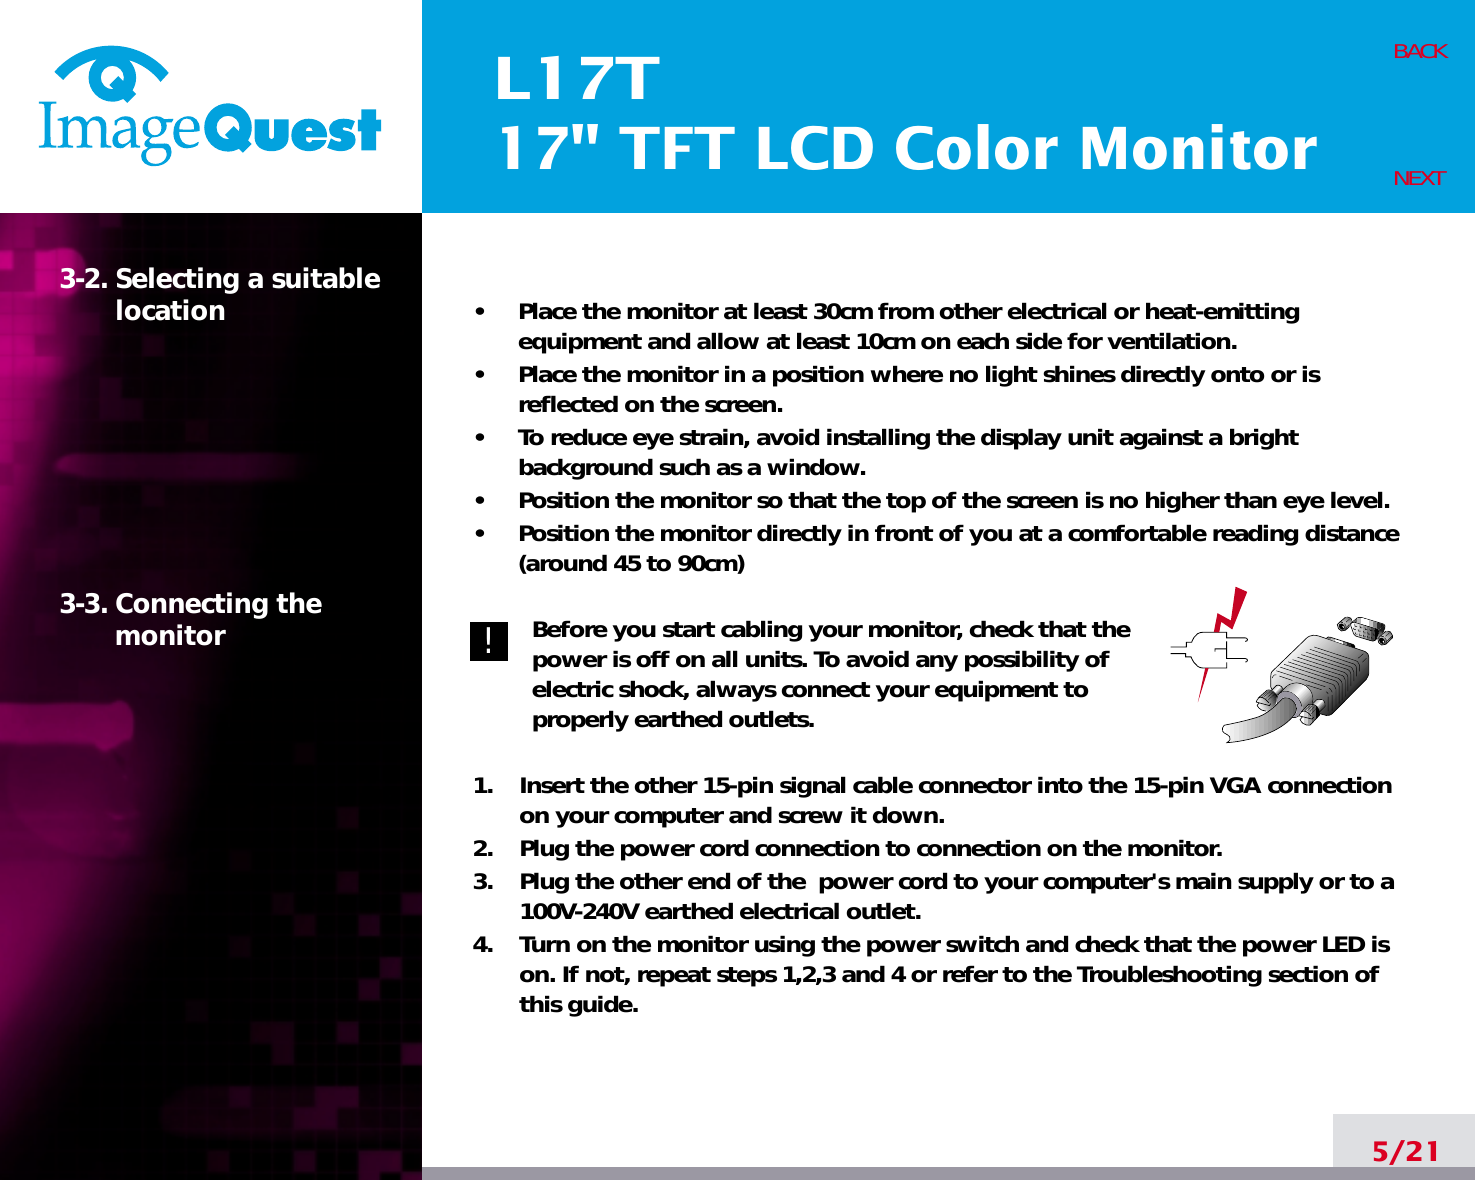 L17T17&quot; TFT LCD Color Monitor5/21BACKNEXT3-2. Selecting a suitablelocation3-3. Connecting the monitor•     Place the monitor at least 30cm from other electrical or heat-emittingequipment and allow at least 10cm on each side for ventilation.•     Place the monitor in a position where no light shines directly onto or isreflected on the screen.•     To reduce eye strain, avoid installing the display unit against a brightbackground such as a window.•     Position the monitor so that the top of the screen is no higher than eye level.•     Position the monitor directly in front of you at a comfortable reading distance(around 45 to 90cm) Before you start cabling your monitor, check that thepower is off on all units. To avoid any possibility ofelectric shock, always connect your equipment toproperly earthed outlets.1.    Insert the other 15-pin signal cable connector into the 15-pin VGA connectionon your computer and screw it down. 2.    Plug the power cord connection to connection on the monitor.3.    Plug the other end of the  power cord to your computer&apos;s main supply or to a100V-240V earthed electrical outlet.4.    Turn on the monitor using the power switch and check that the power LED ison. If not, repeat steps 1,2,3 and 4 or refer to the Troubleshooting section ofthis guide.!!